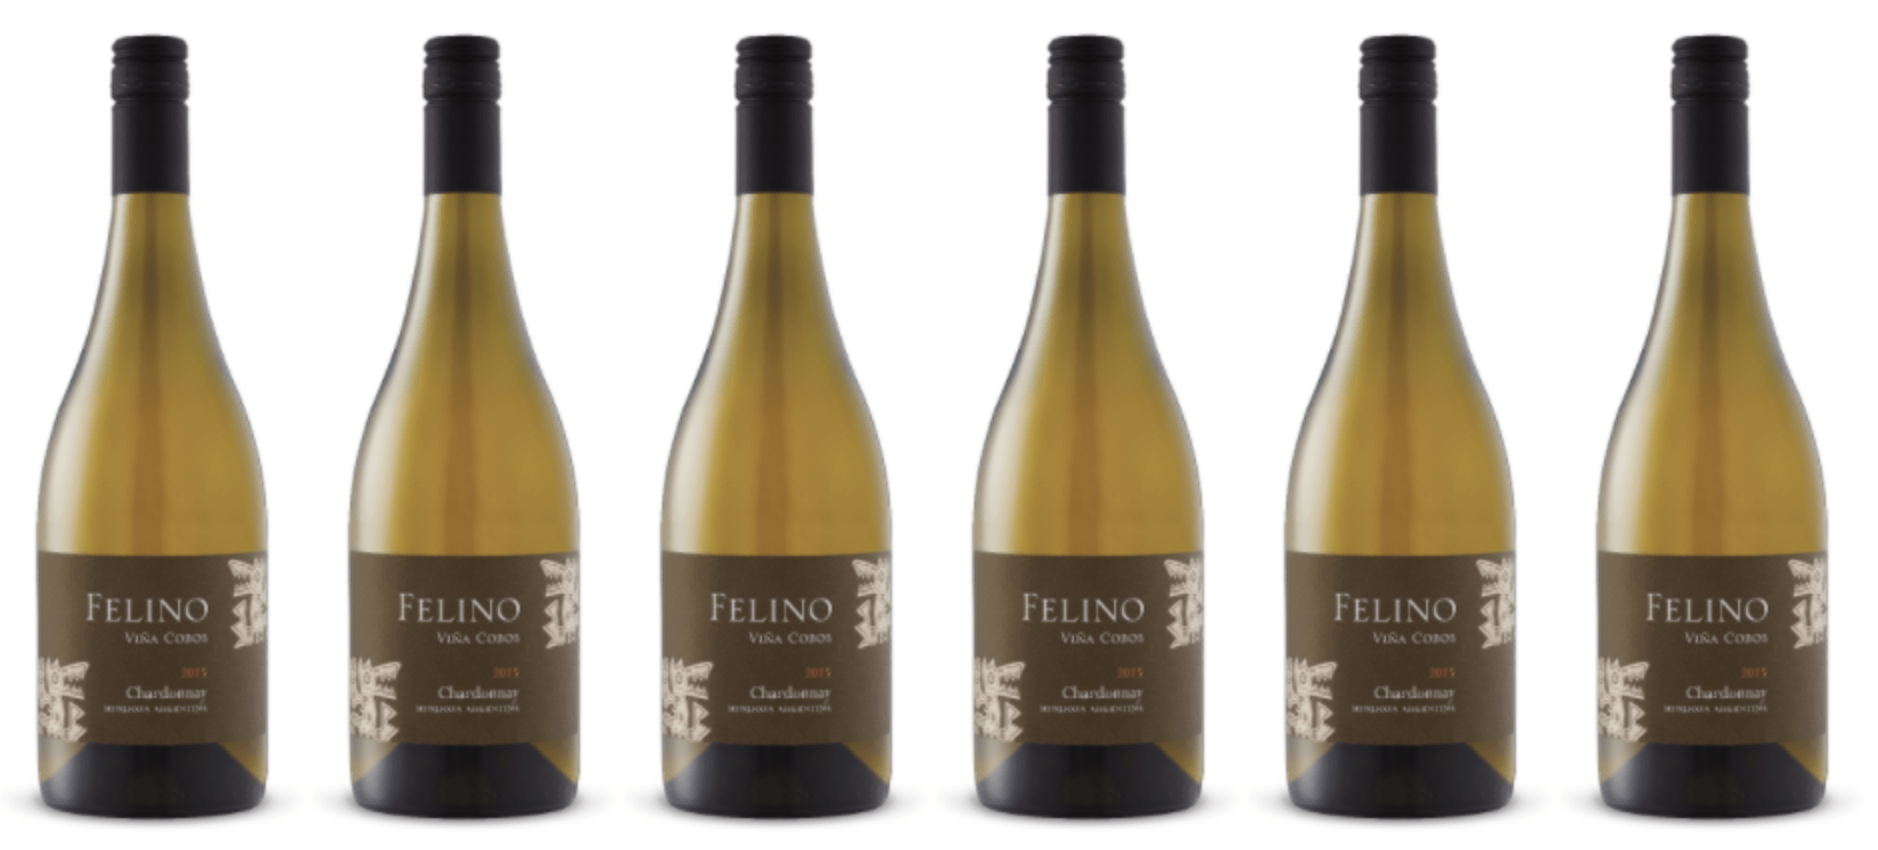 Try This : A Well-Priced And Remarkably Polished Argentinian Chardonnay